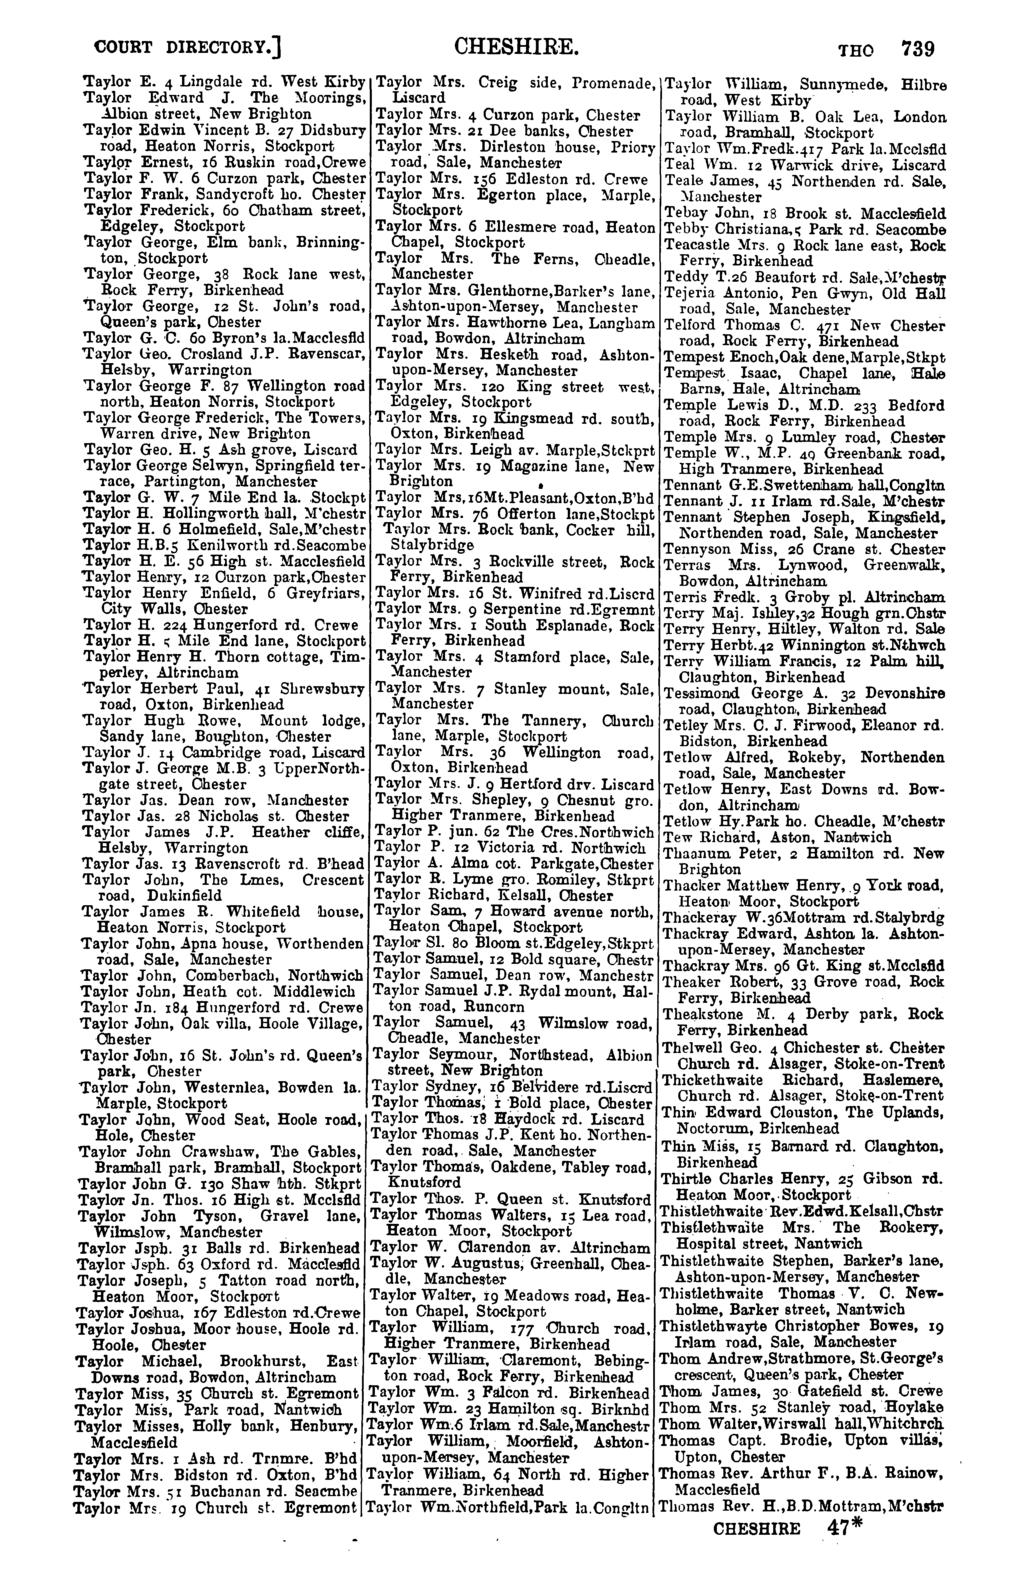 COURT DIRECTORY.] CHESHIRE. 'IHO 739 Taylor E. 4 Lingdale rd. West Kirby Taylor Mrs. Taylor ~dward J. The MooTings, Liscard Creig side, Promenade, Taylor William, Sunnymede, roa.d, West Kirby Hilbre.